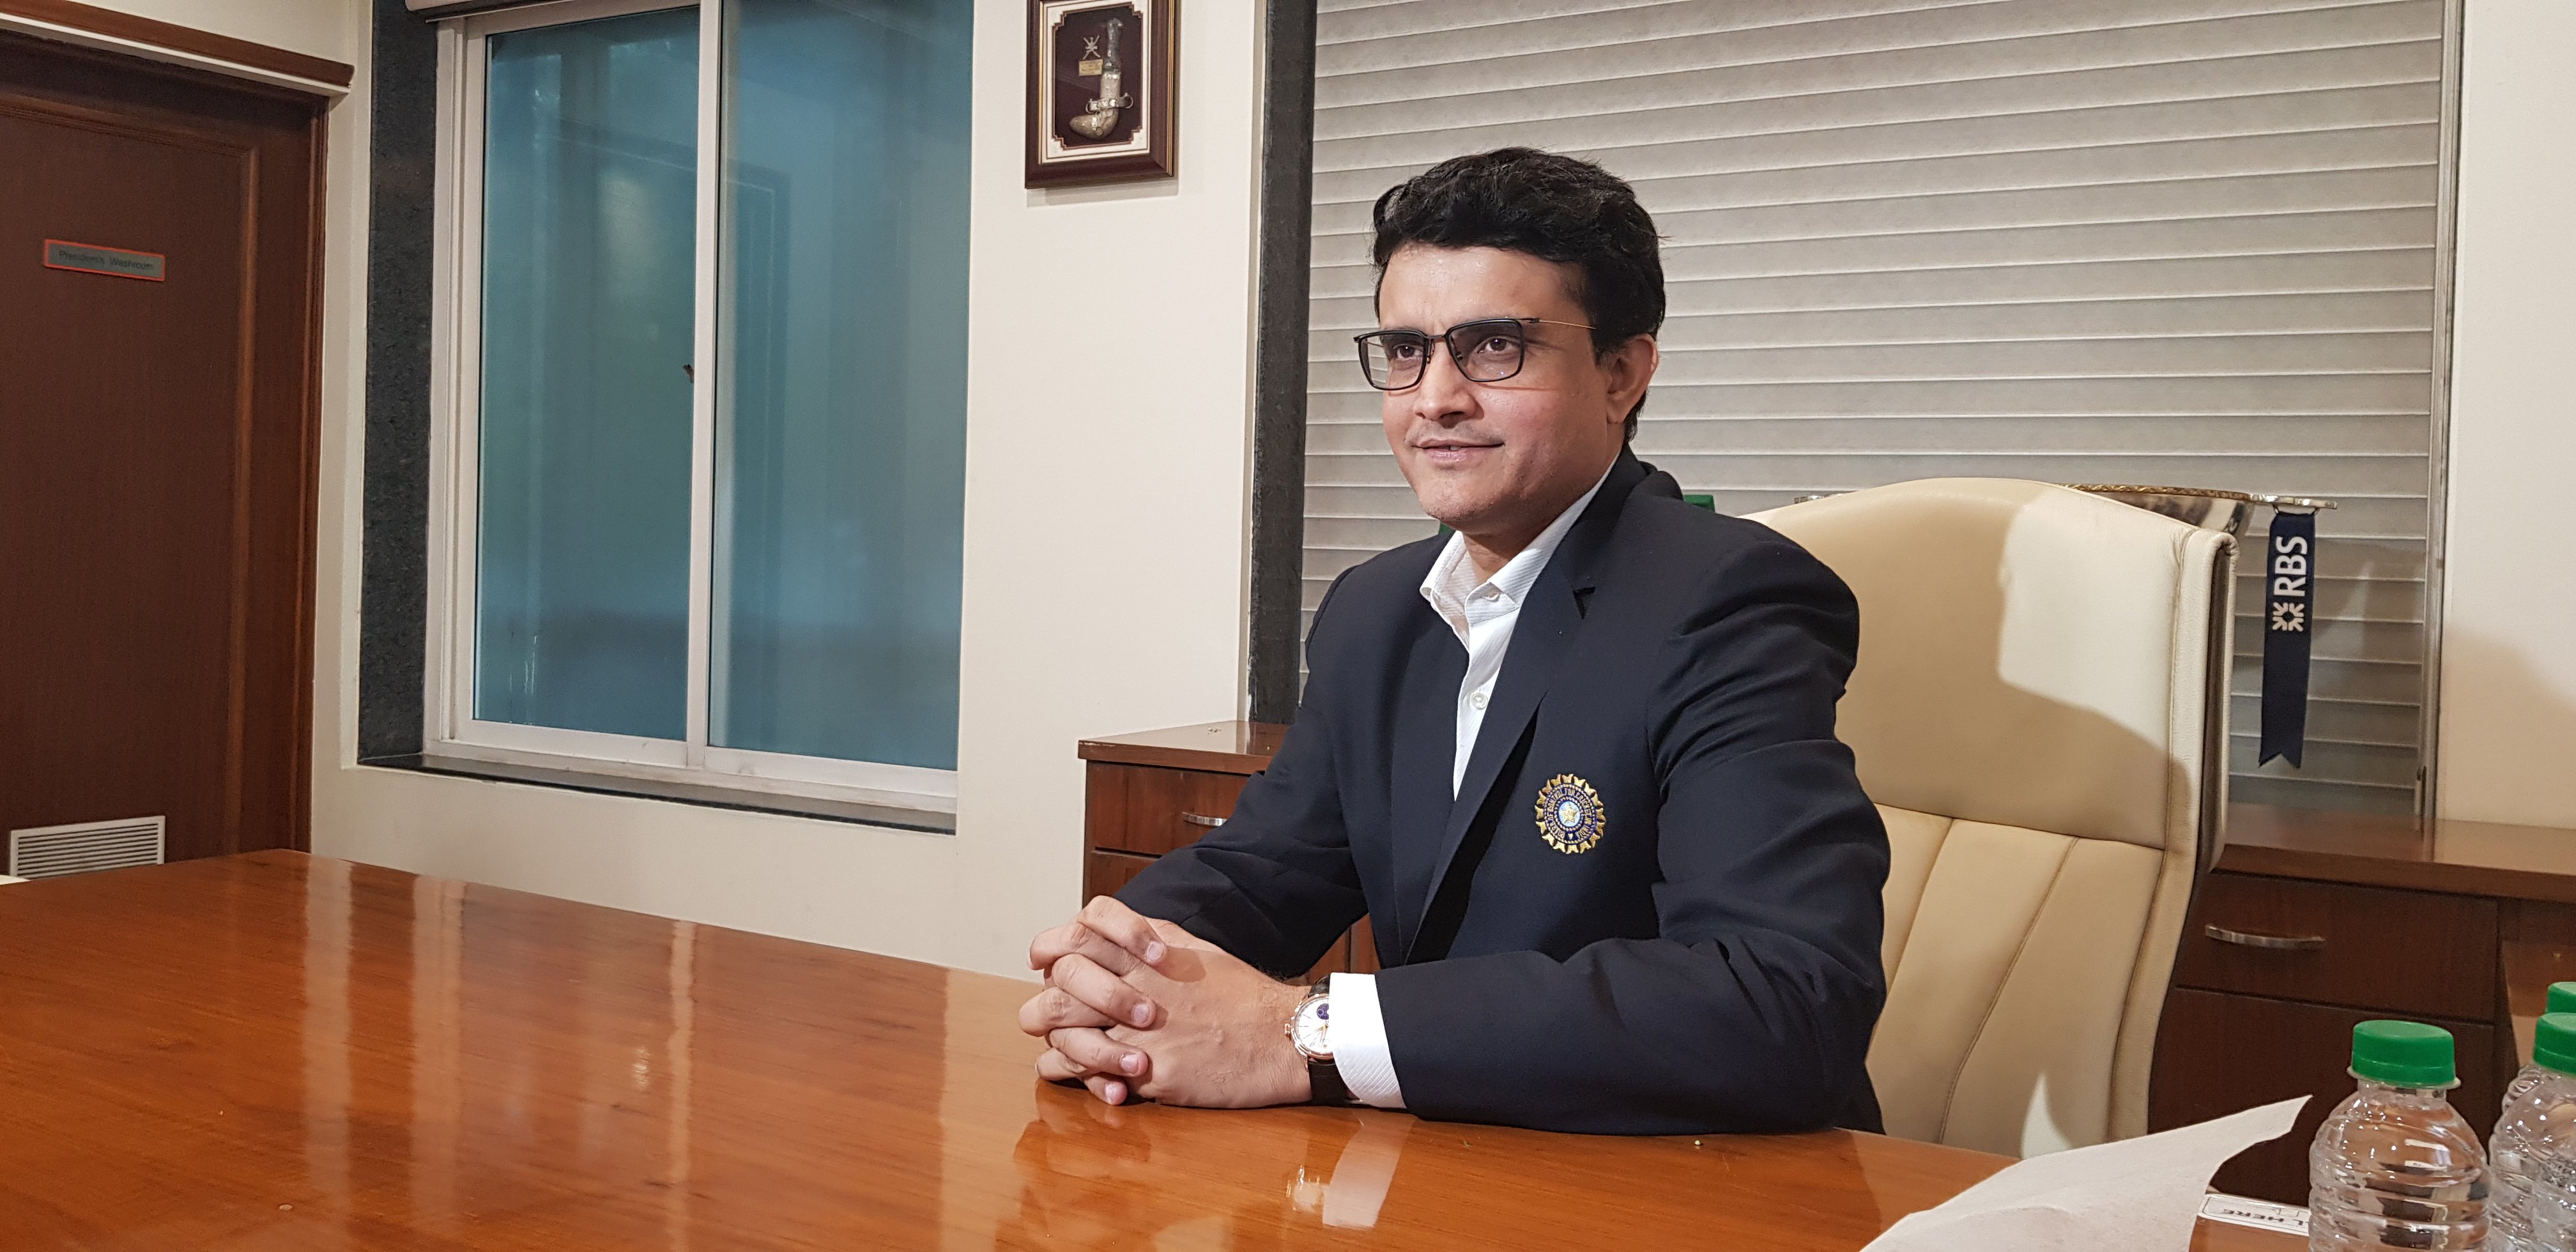 Collaborated with Sachin, Azhar, and Dravid as leaders and shared responsibility, states Sourav Ganguly